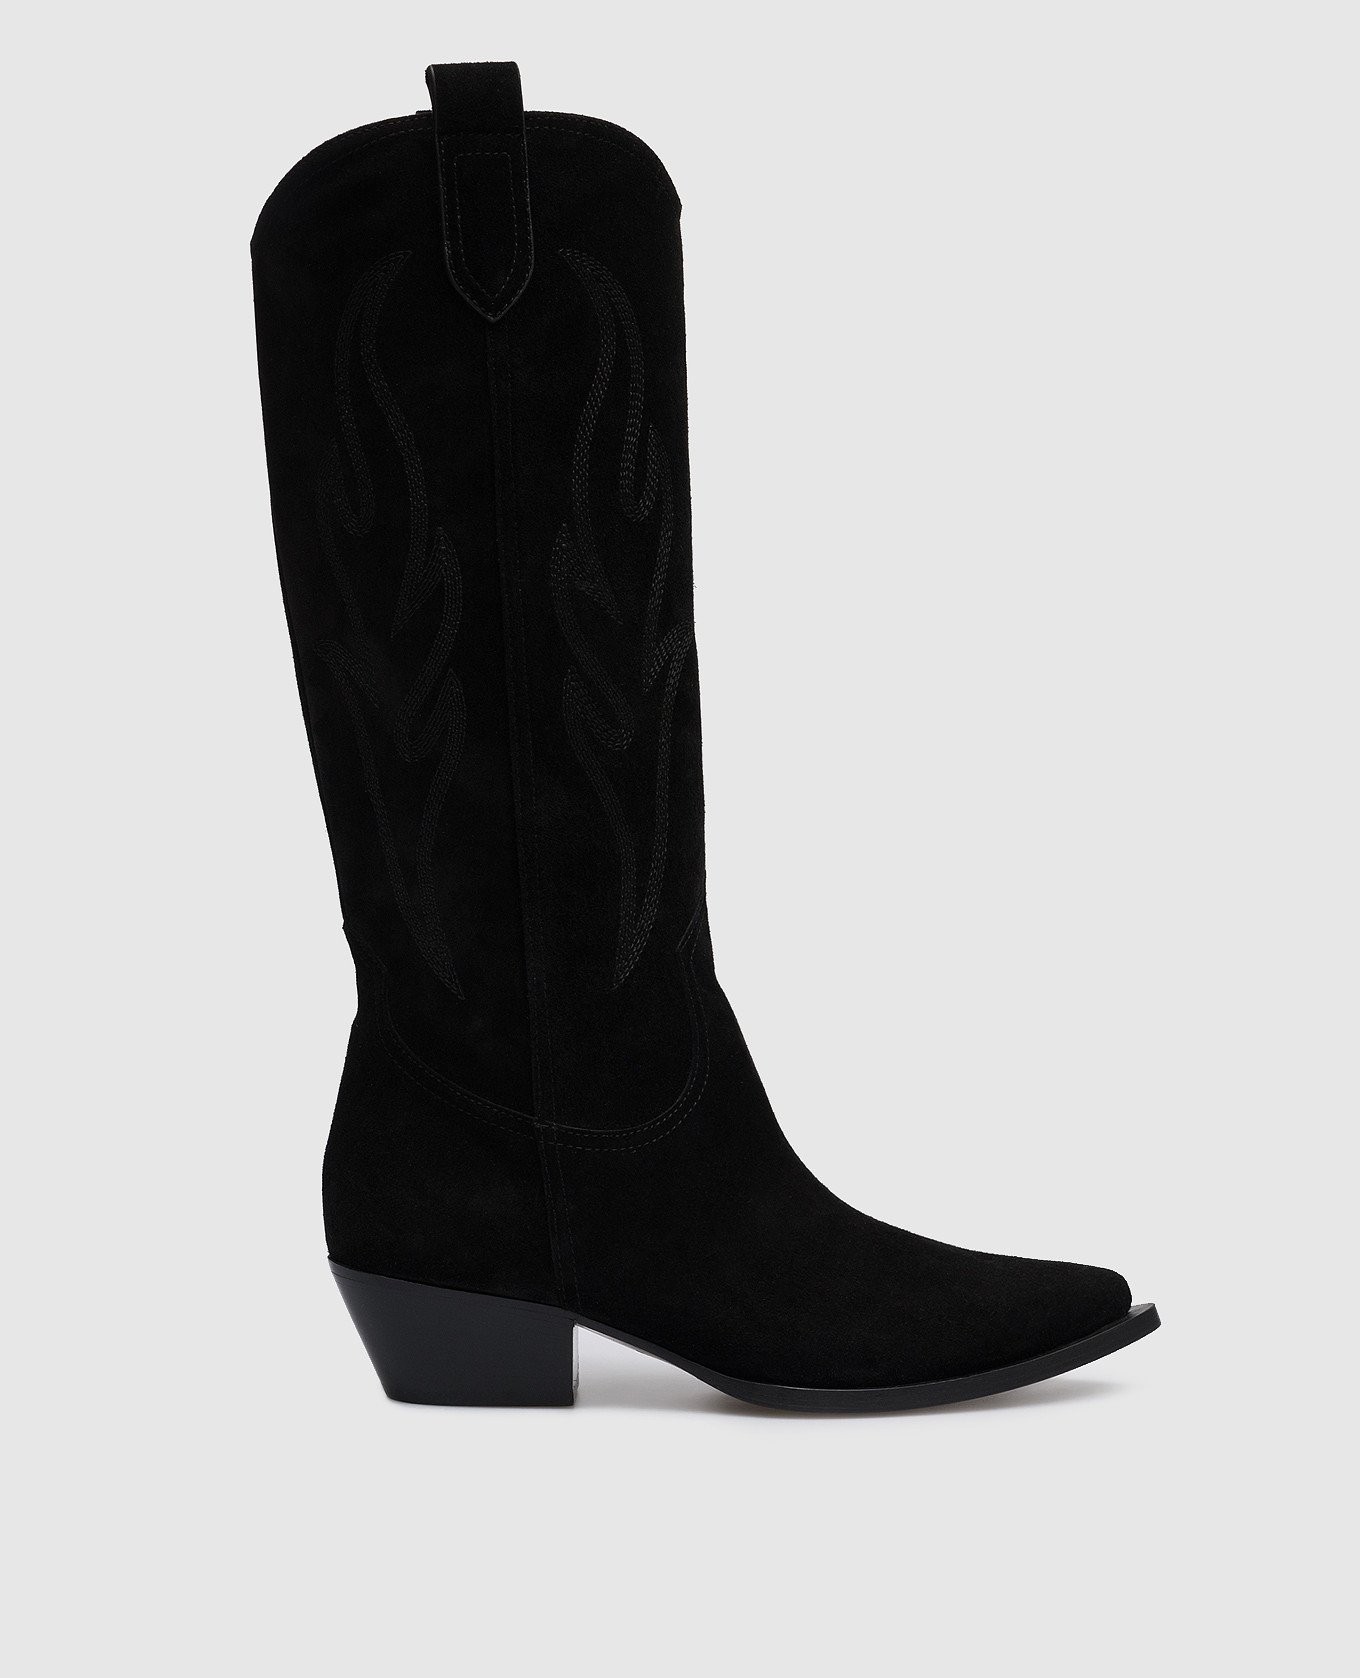 Black suede Dallas boots with embroidery